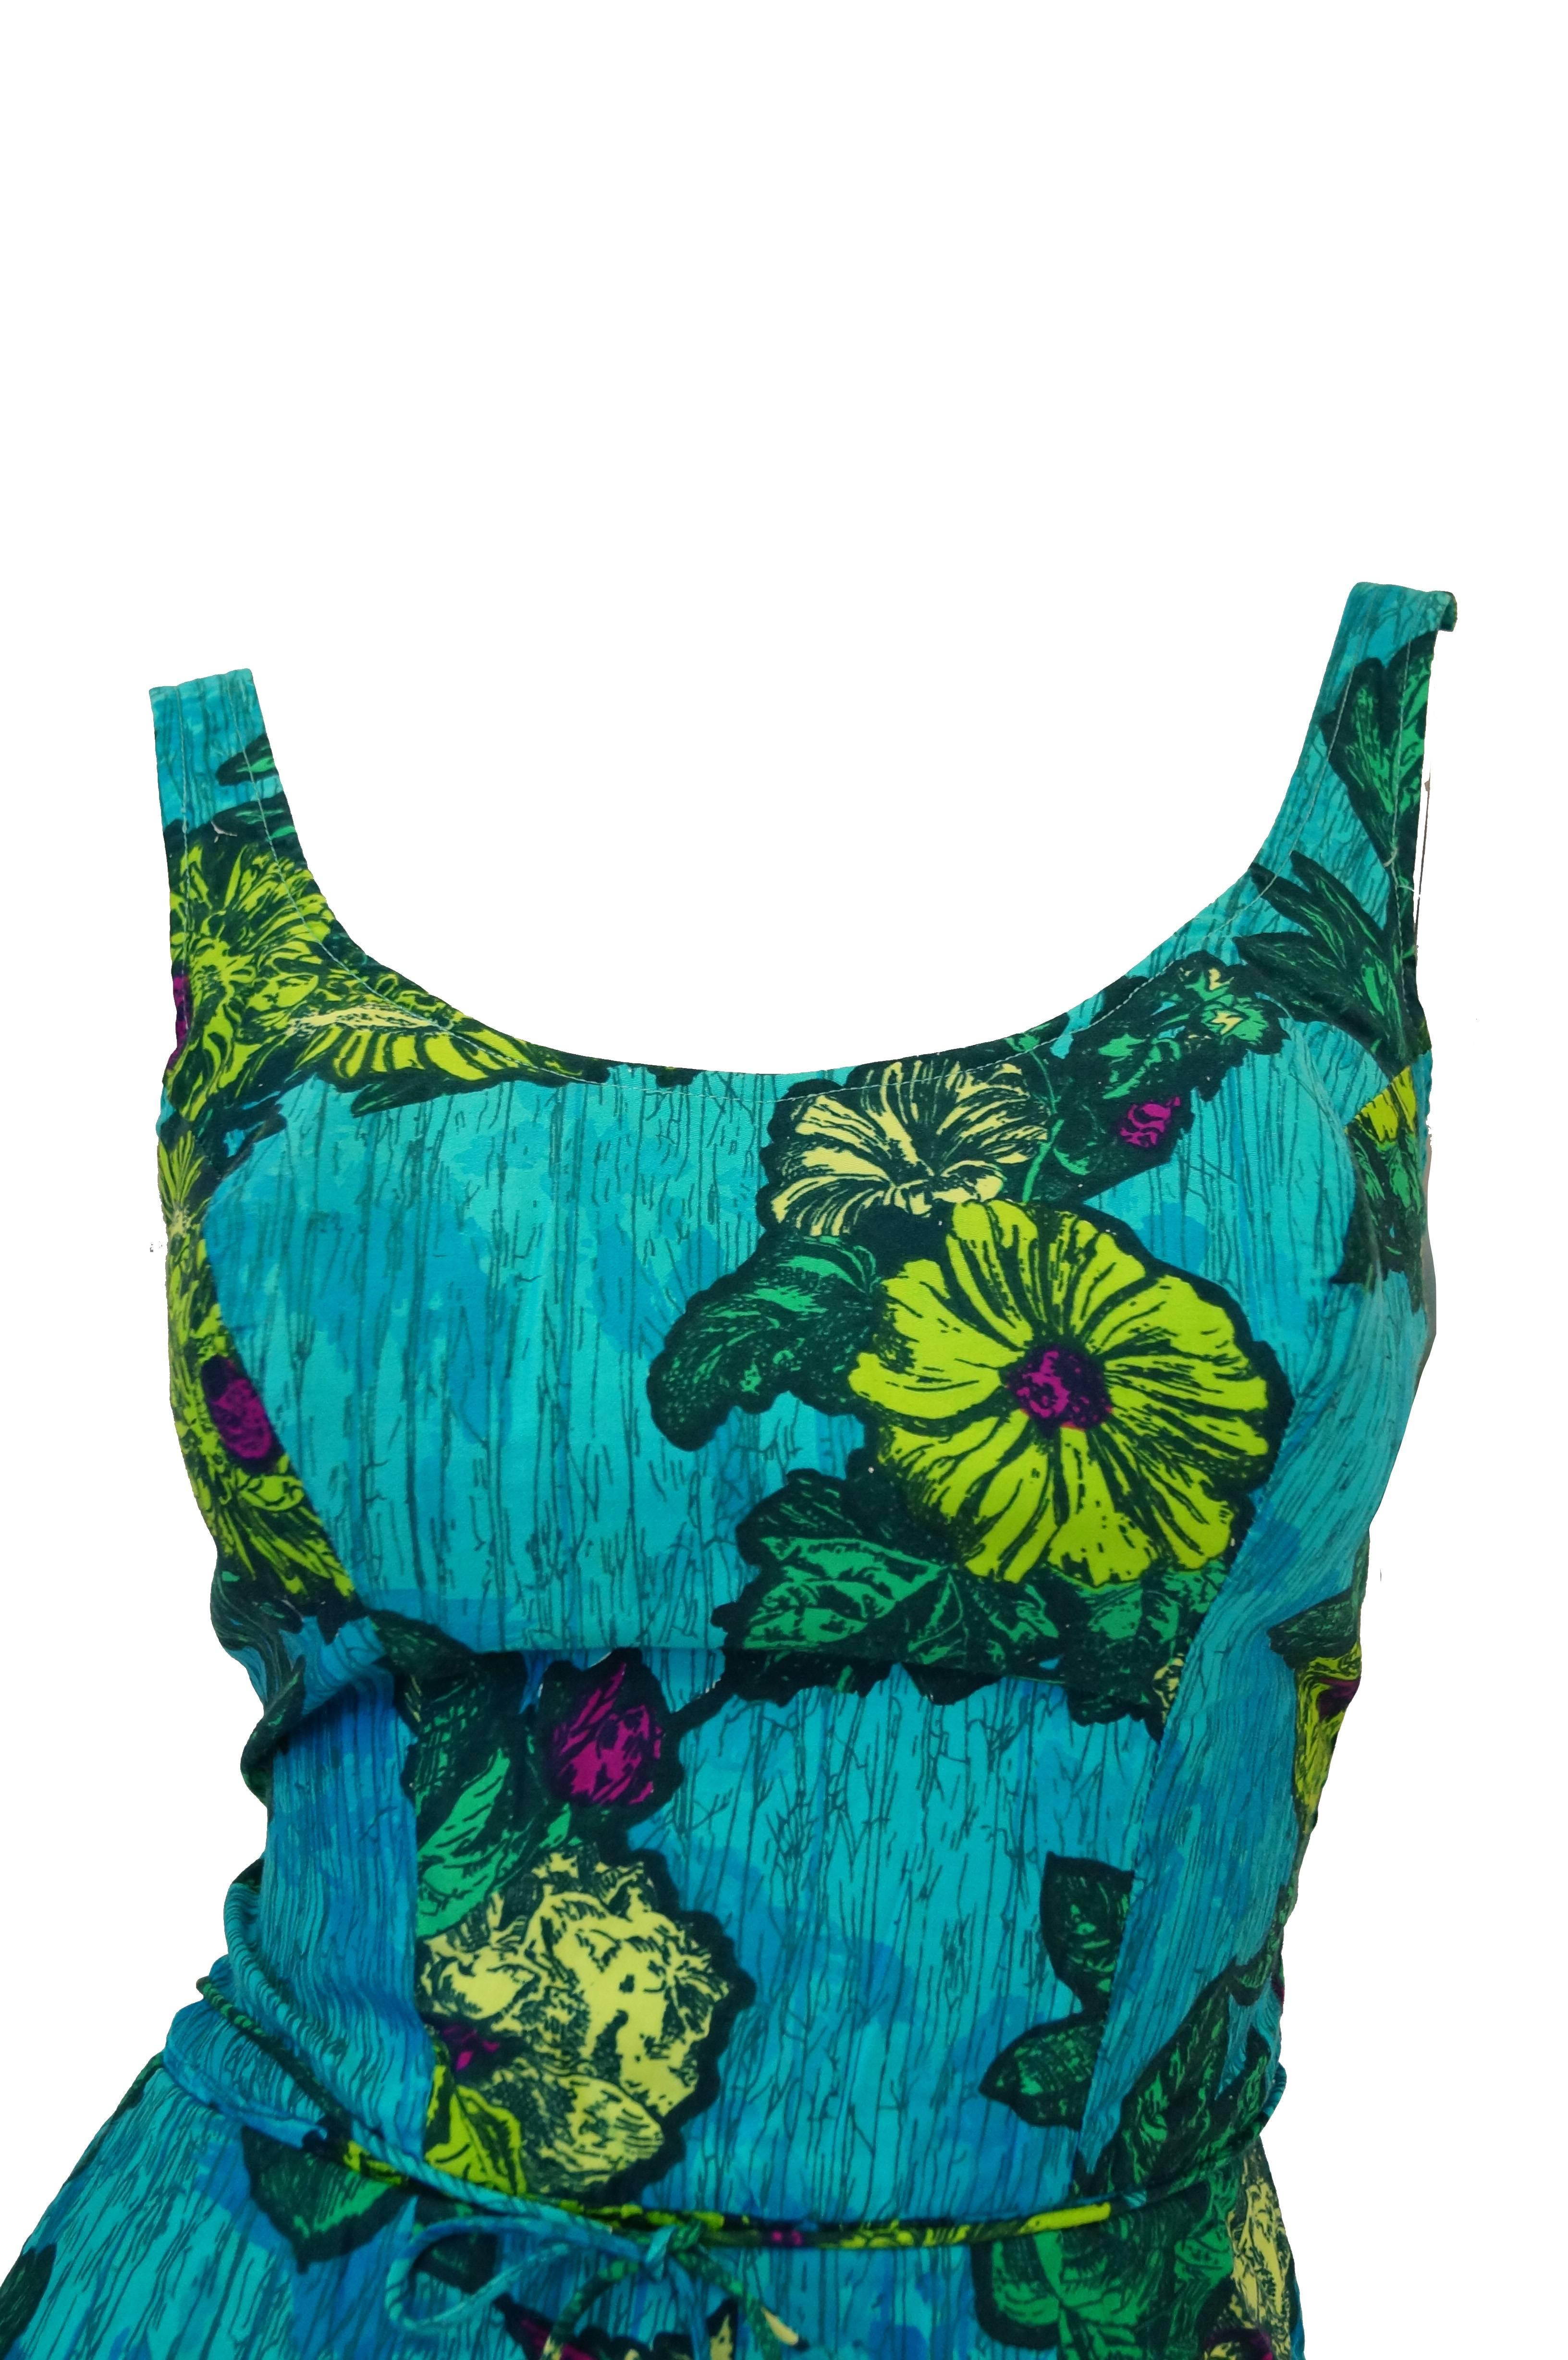 Fabulous Rose Marie Reid one piece blue, green, and yellow block print - look swimsuit with matching cover-up. The swimsuit features bloomer shorts, a cinched waist with tie, and a wide scoop neck and scoop back with narrow, adjustable straps. The